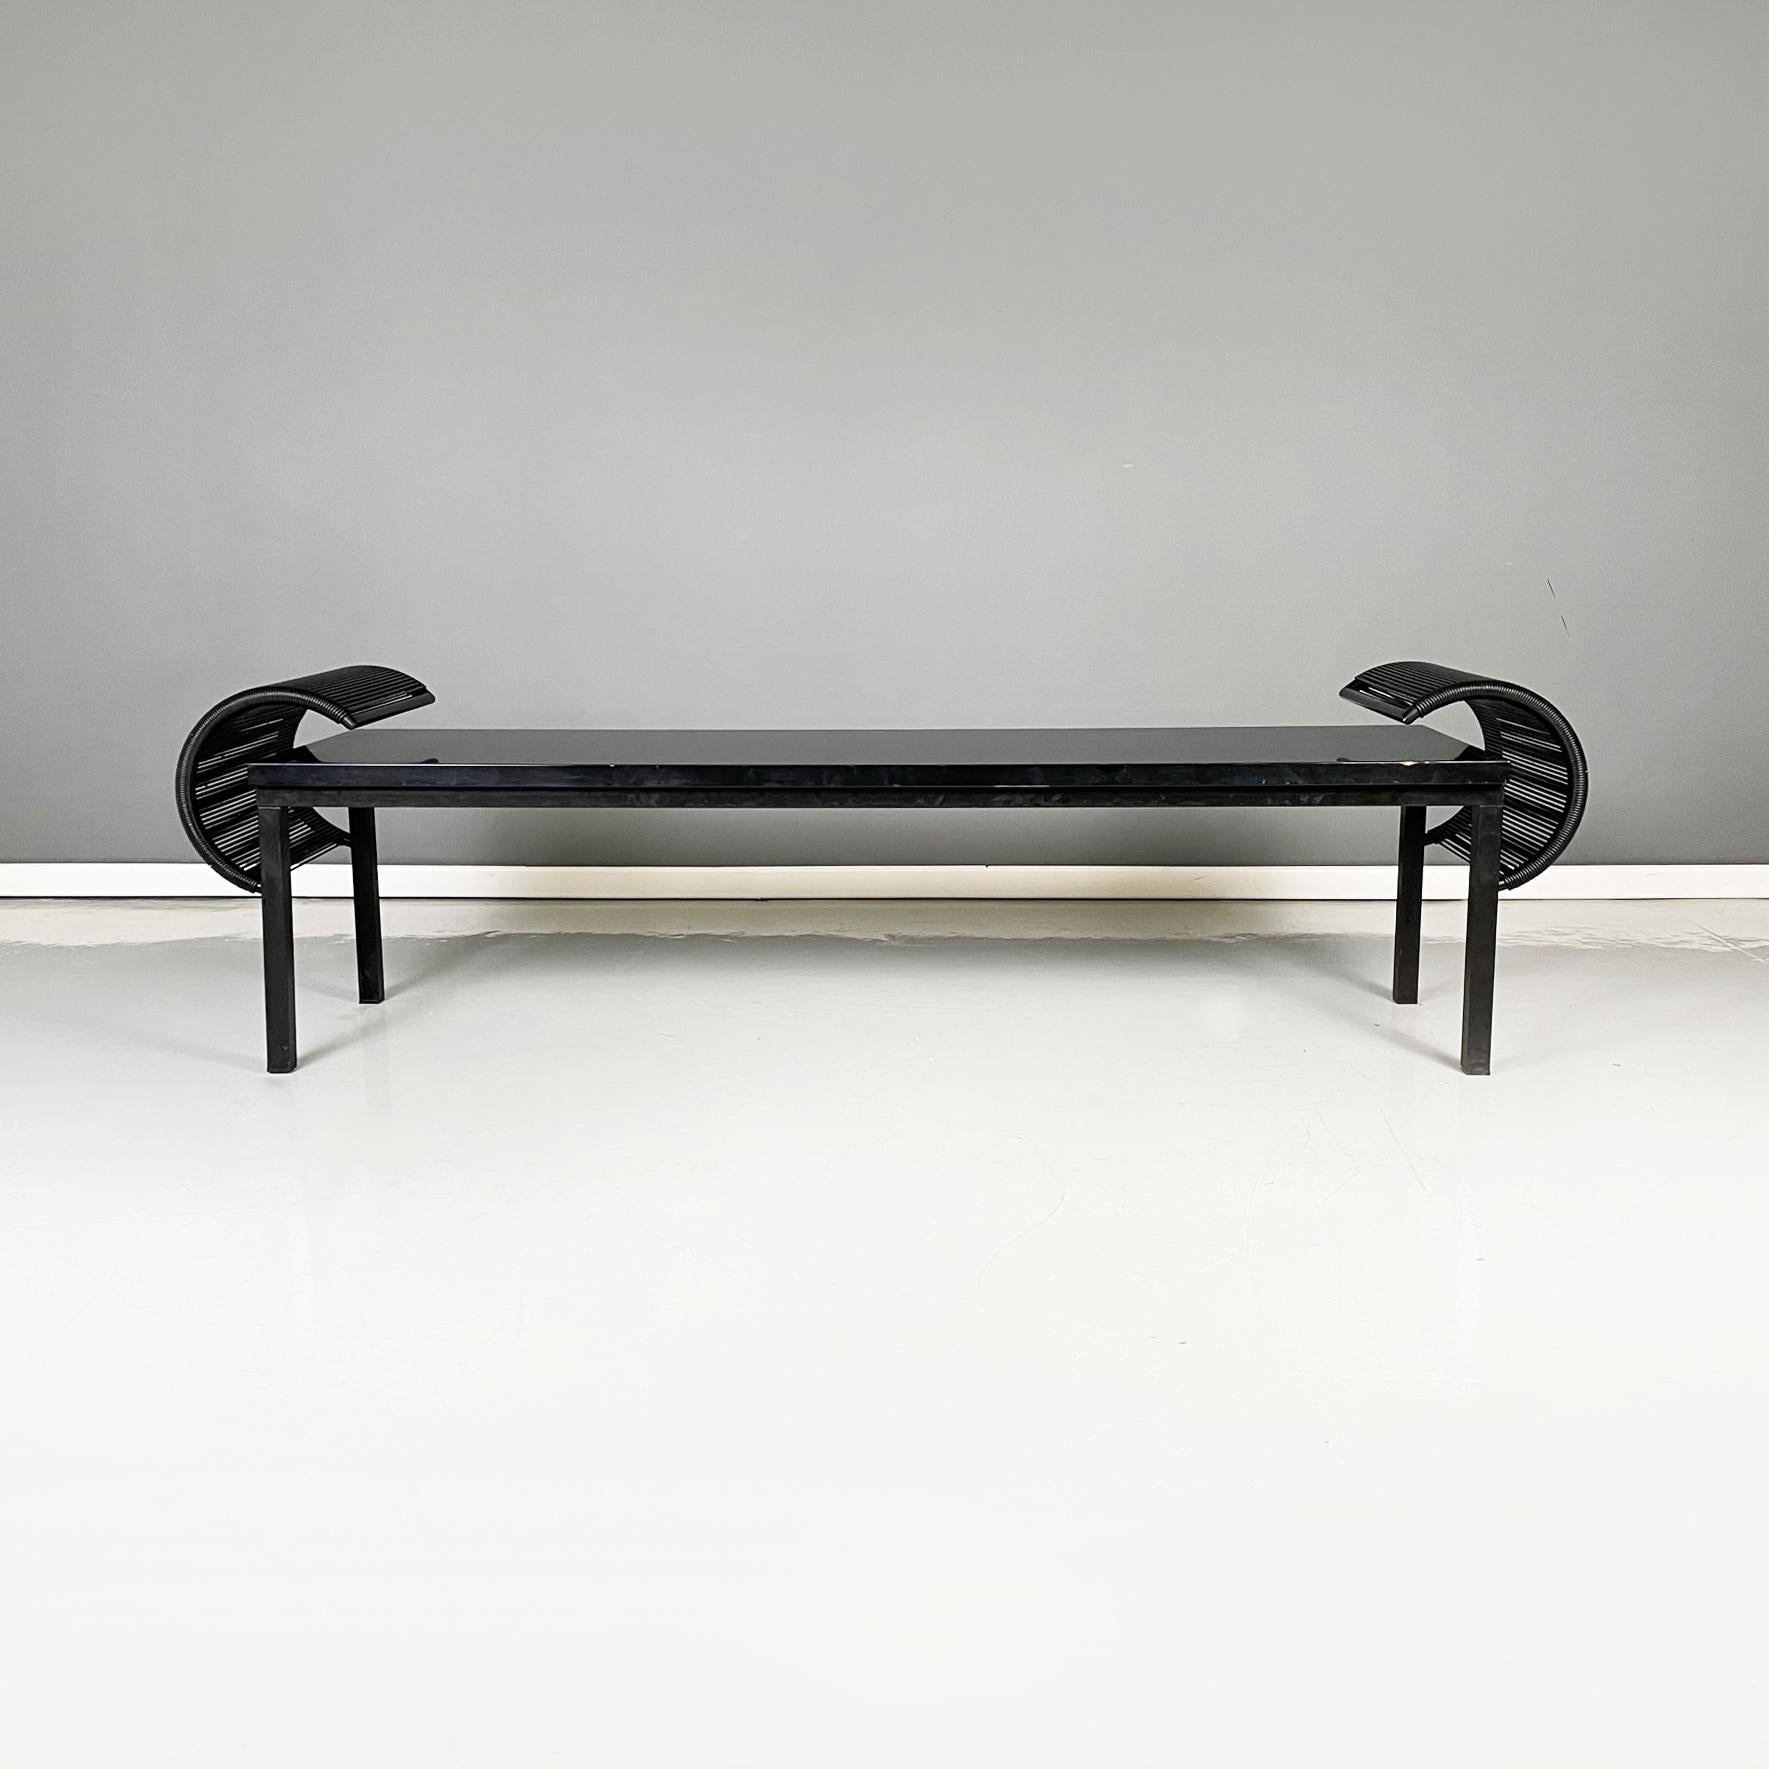 Italian post-modern Black wood, metal and plastic bench by Emilio Nanni for Fly Line, 1990s
Bench with rectangular seat in black lacquered wood. On the side, it has two C-shaped structures, with a black painted metal structure and braided black